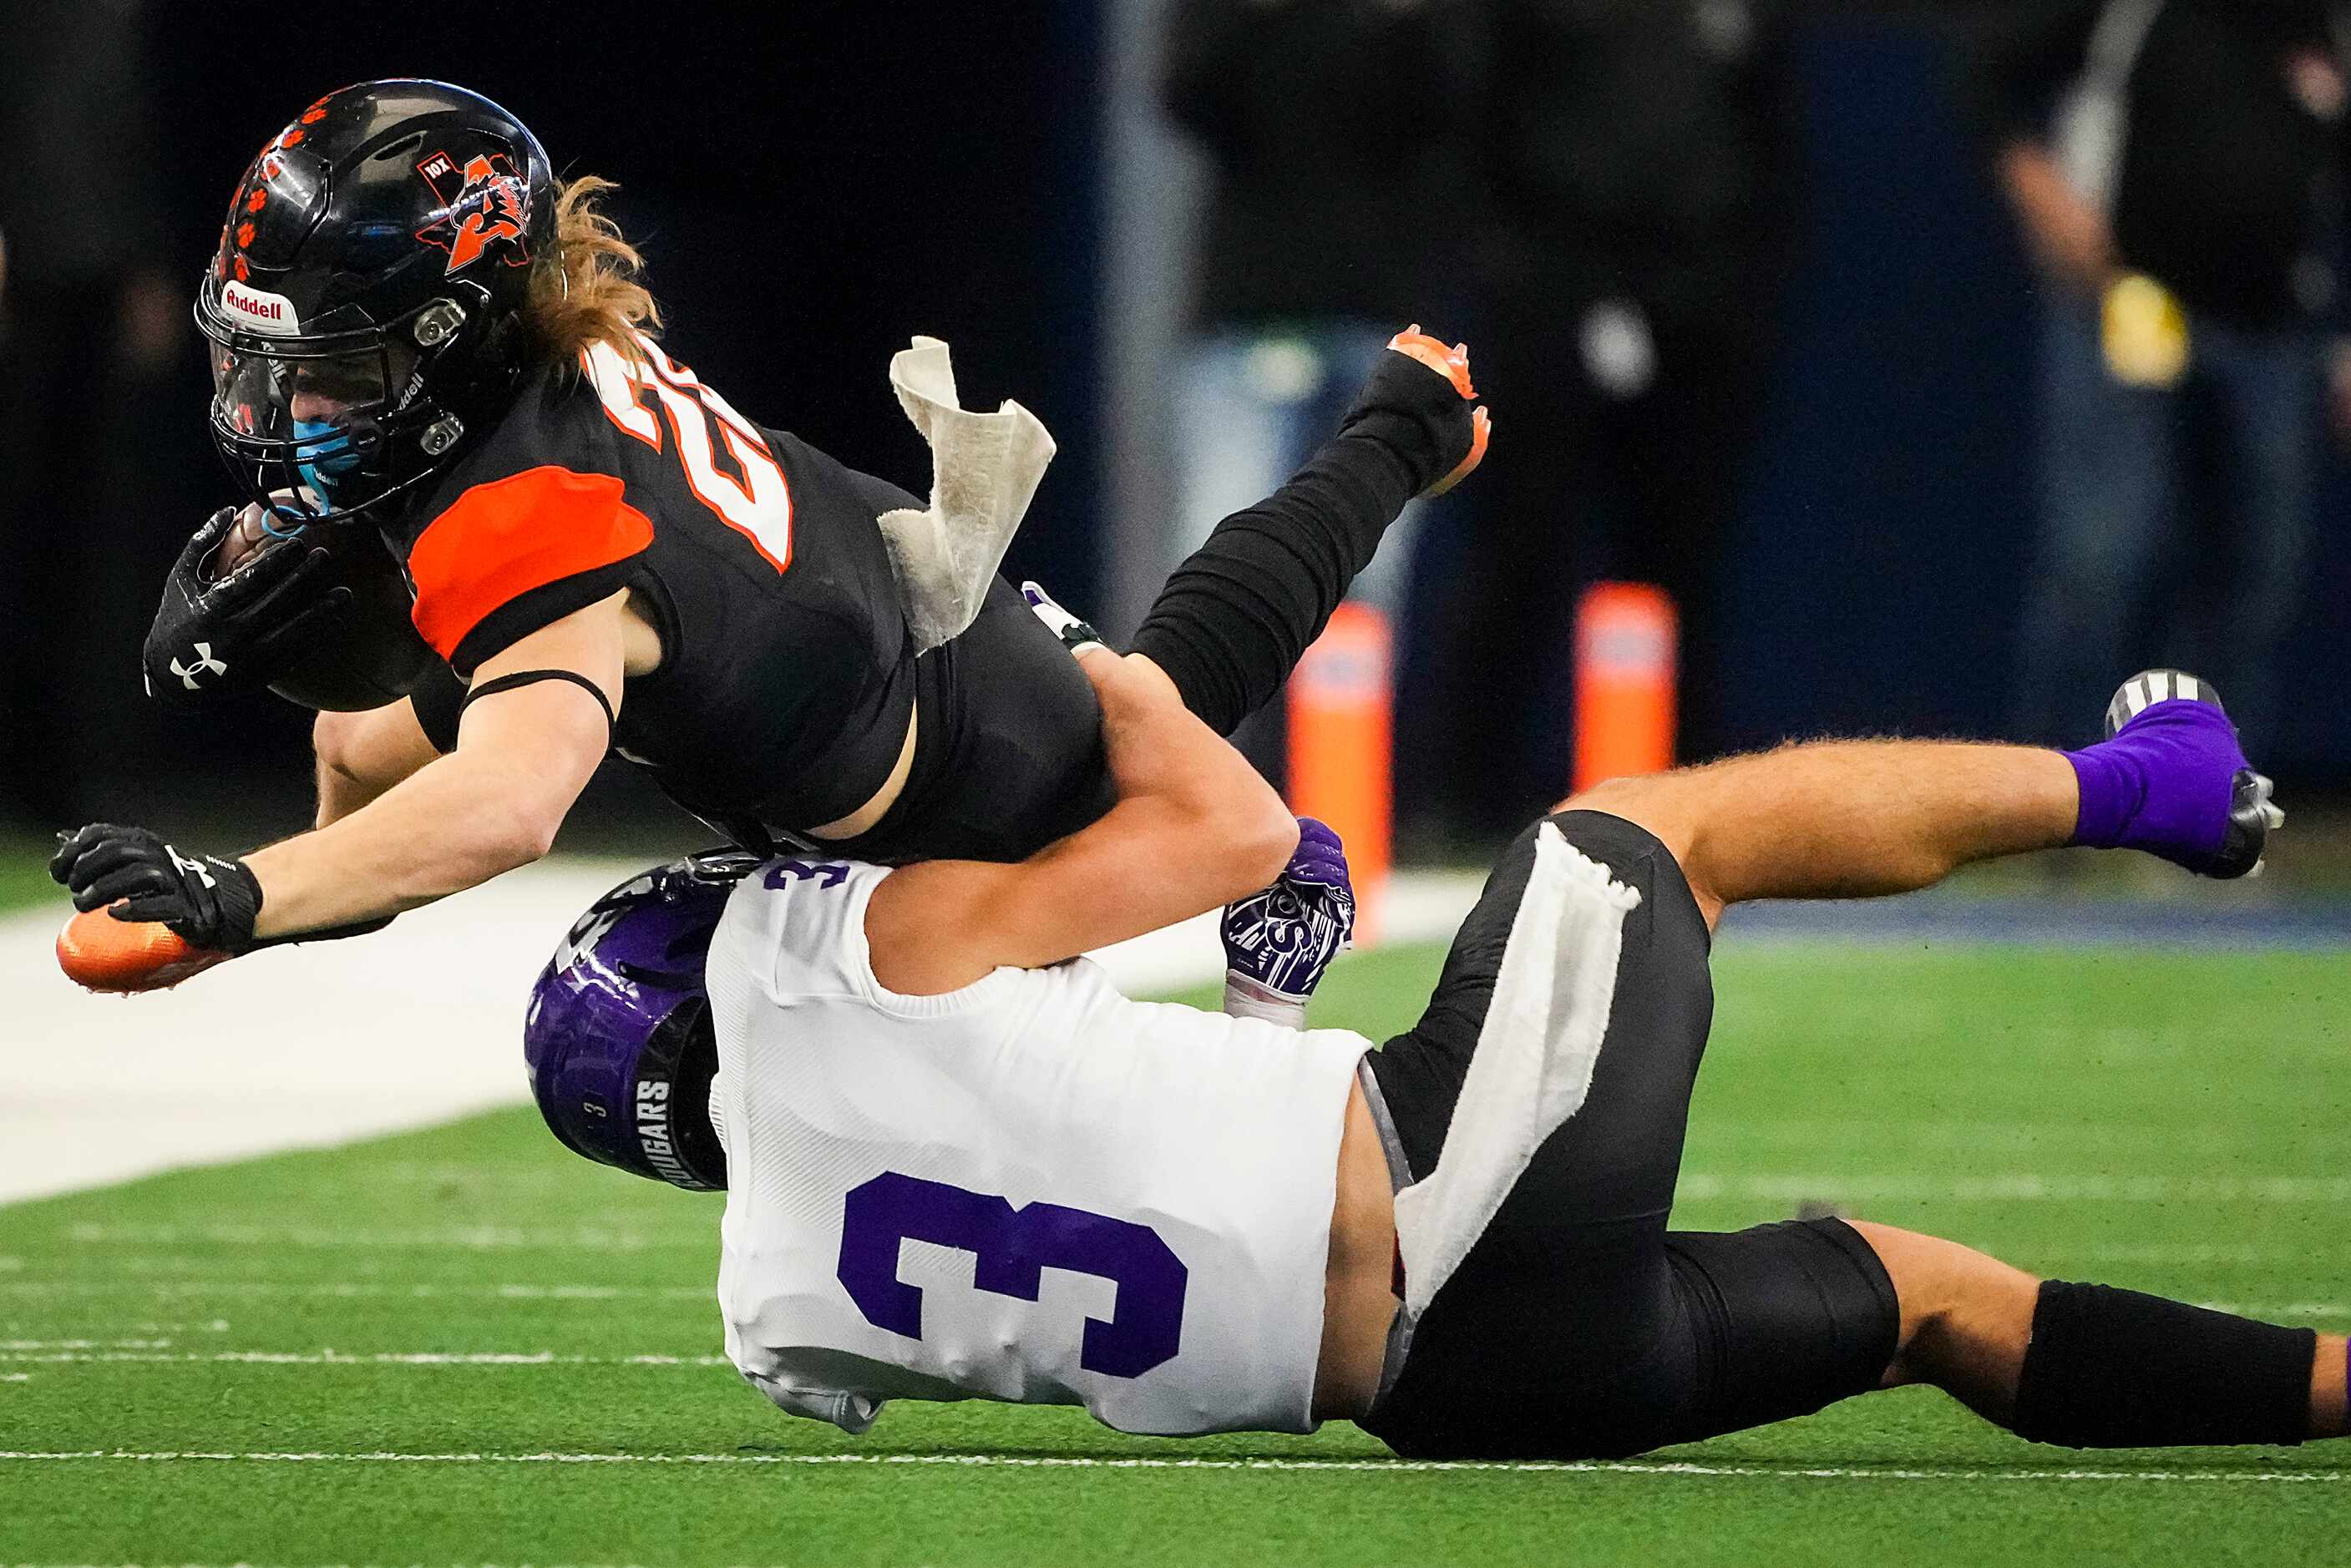 Aledo wide receiver Gavin Olenjack (22) is brought down by College Station wide receiver...